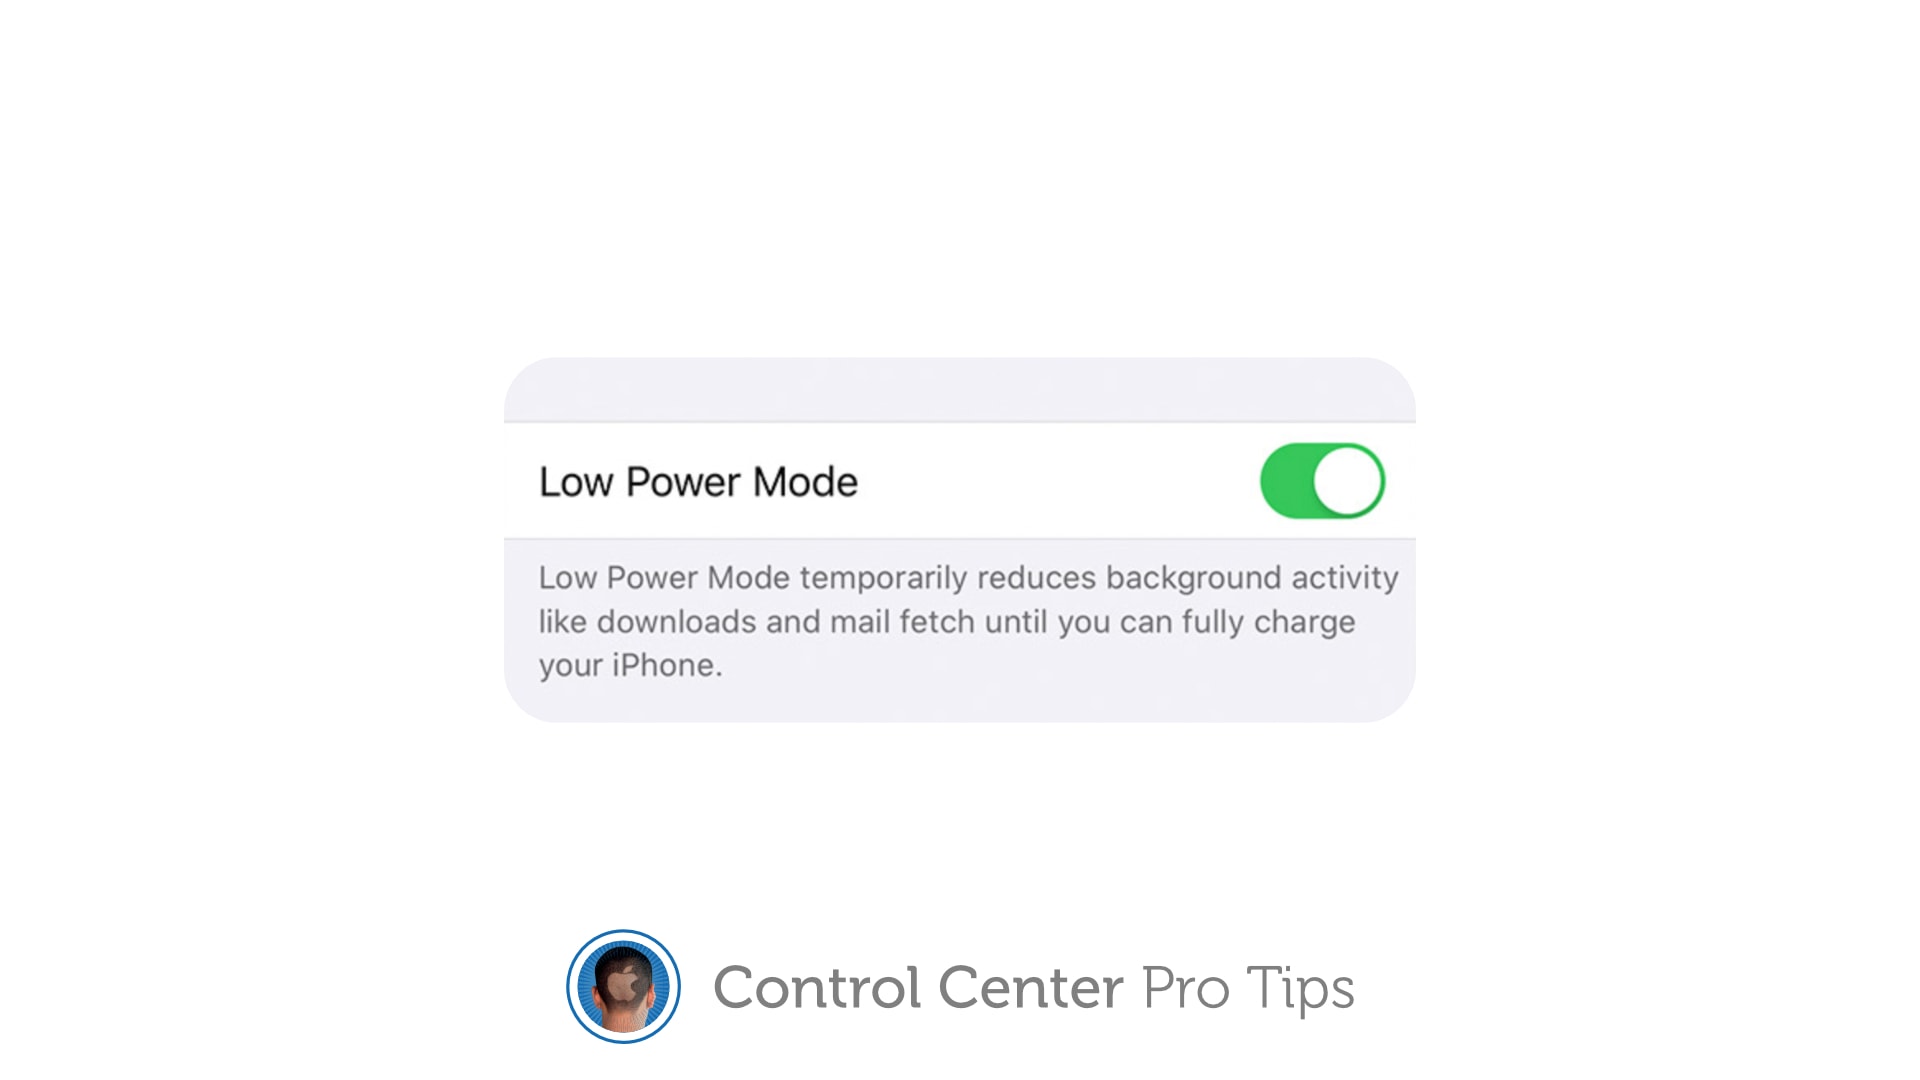 Extend battery life by using Low Power Mode in Control Center [Pro tip]